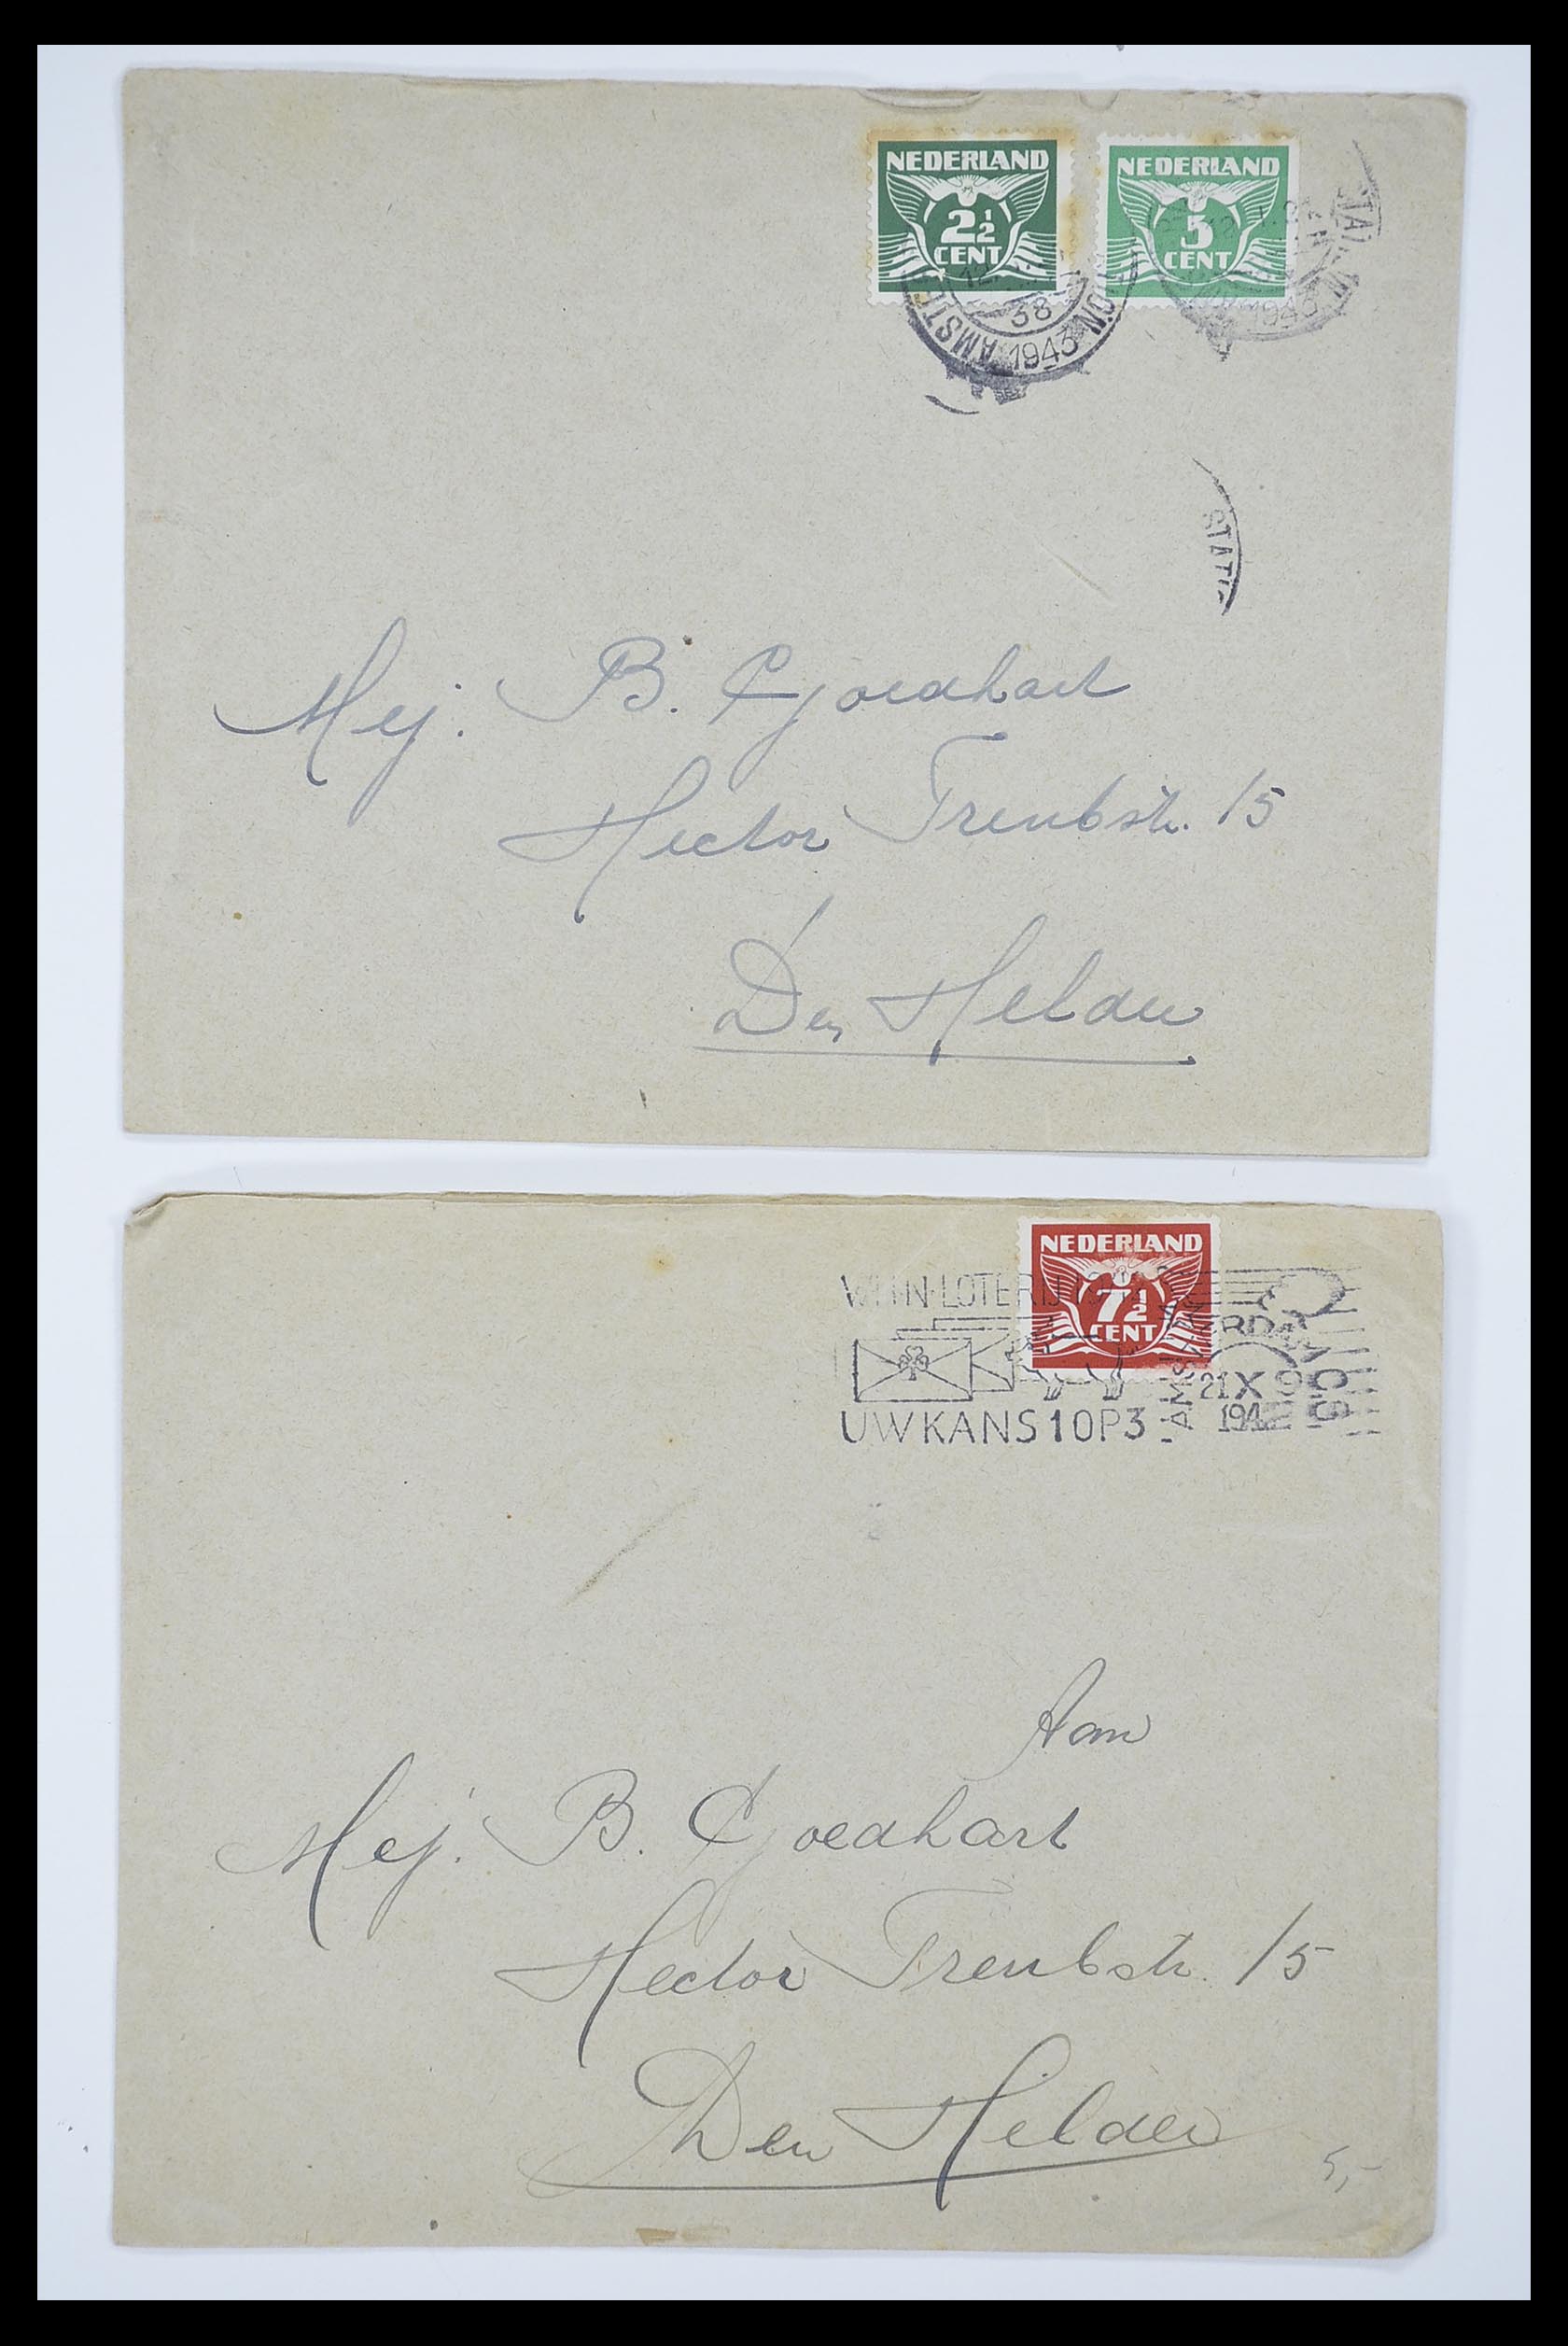 33536 075 - Stamp collection 33536 Netherlands covers 1800-1950.